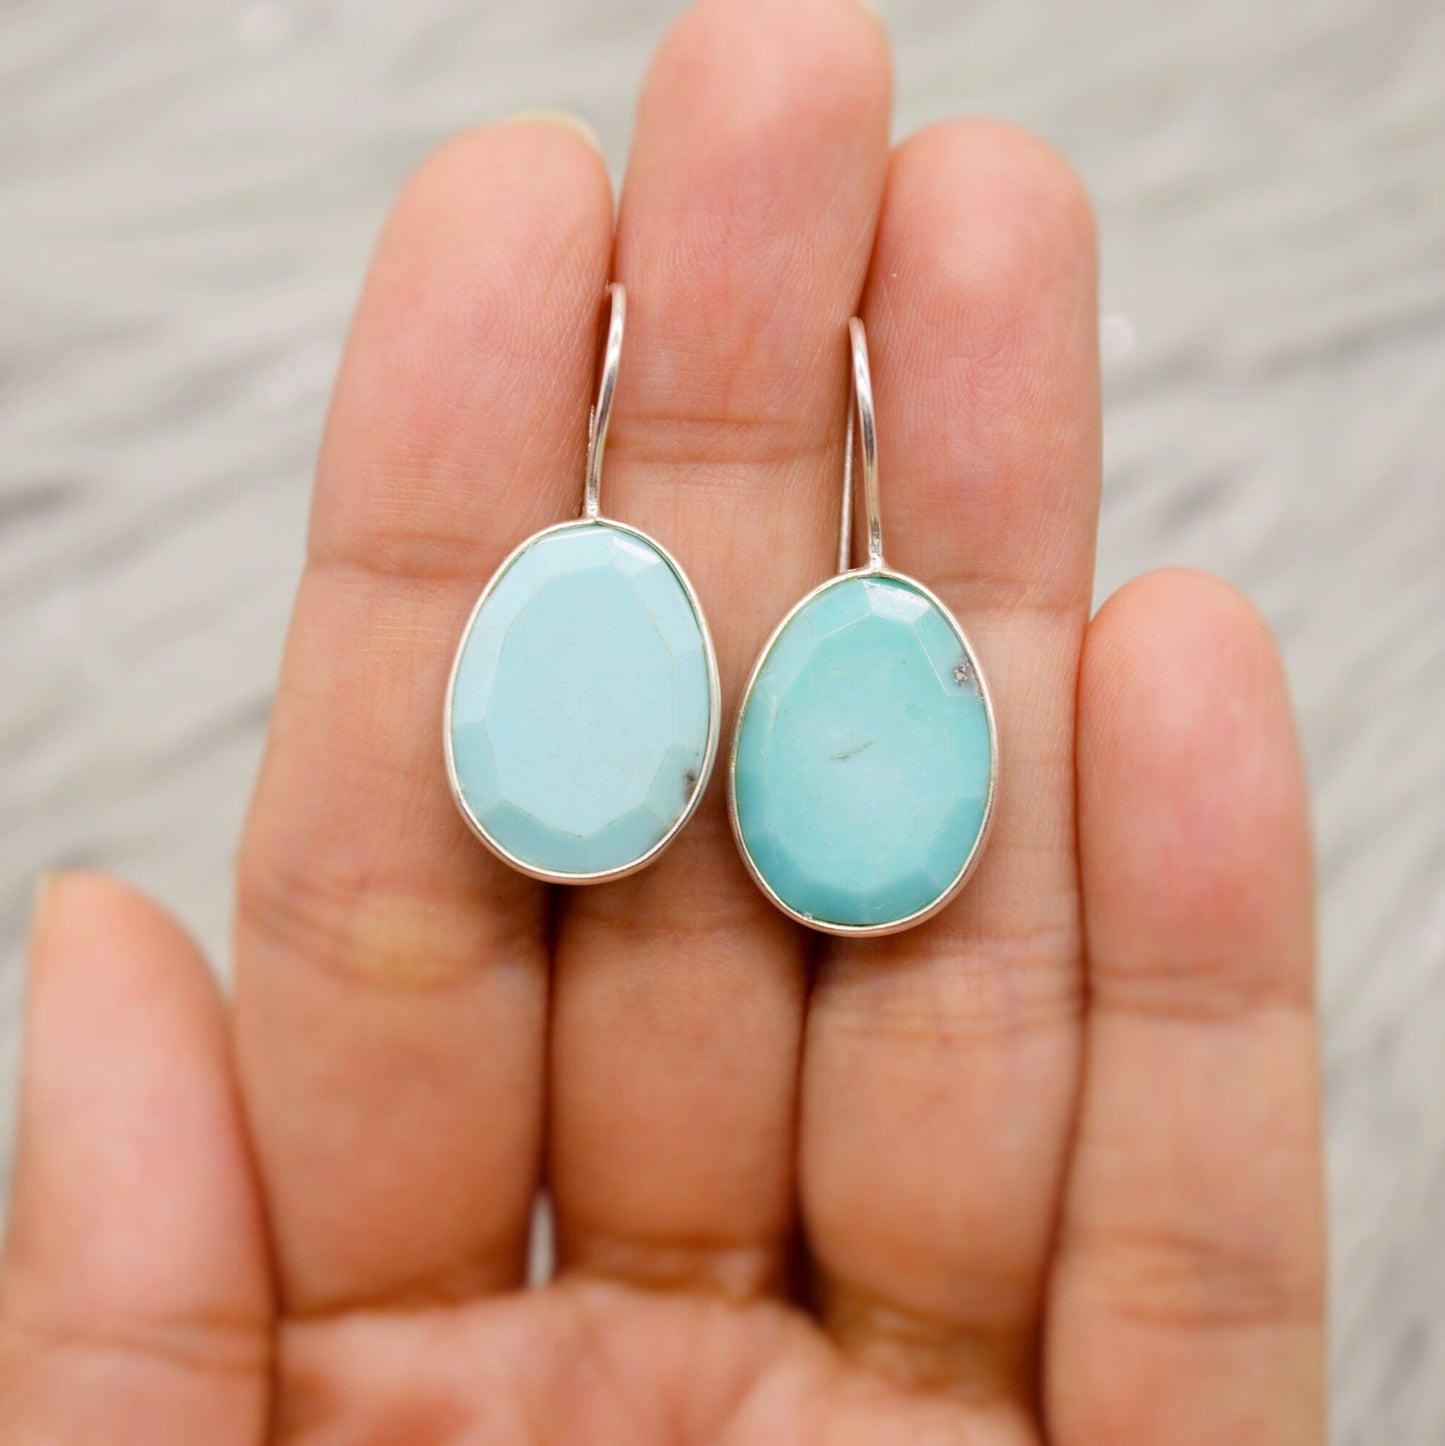 Blue Turquoise Silver Drop Earrings, Turquoise Jewelry, December Birthstone, Unique Gemstone, Sterling Silver Earrings, Birthday Gifts